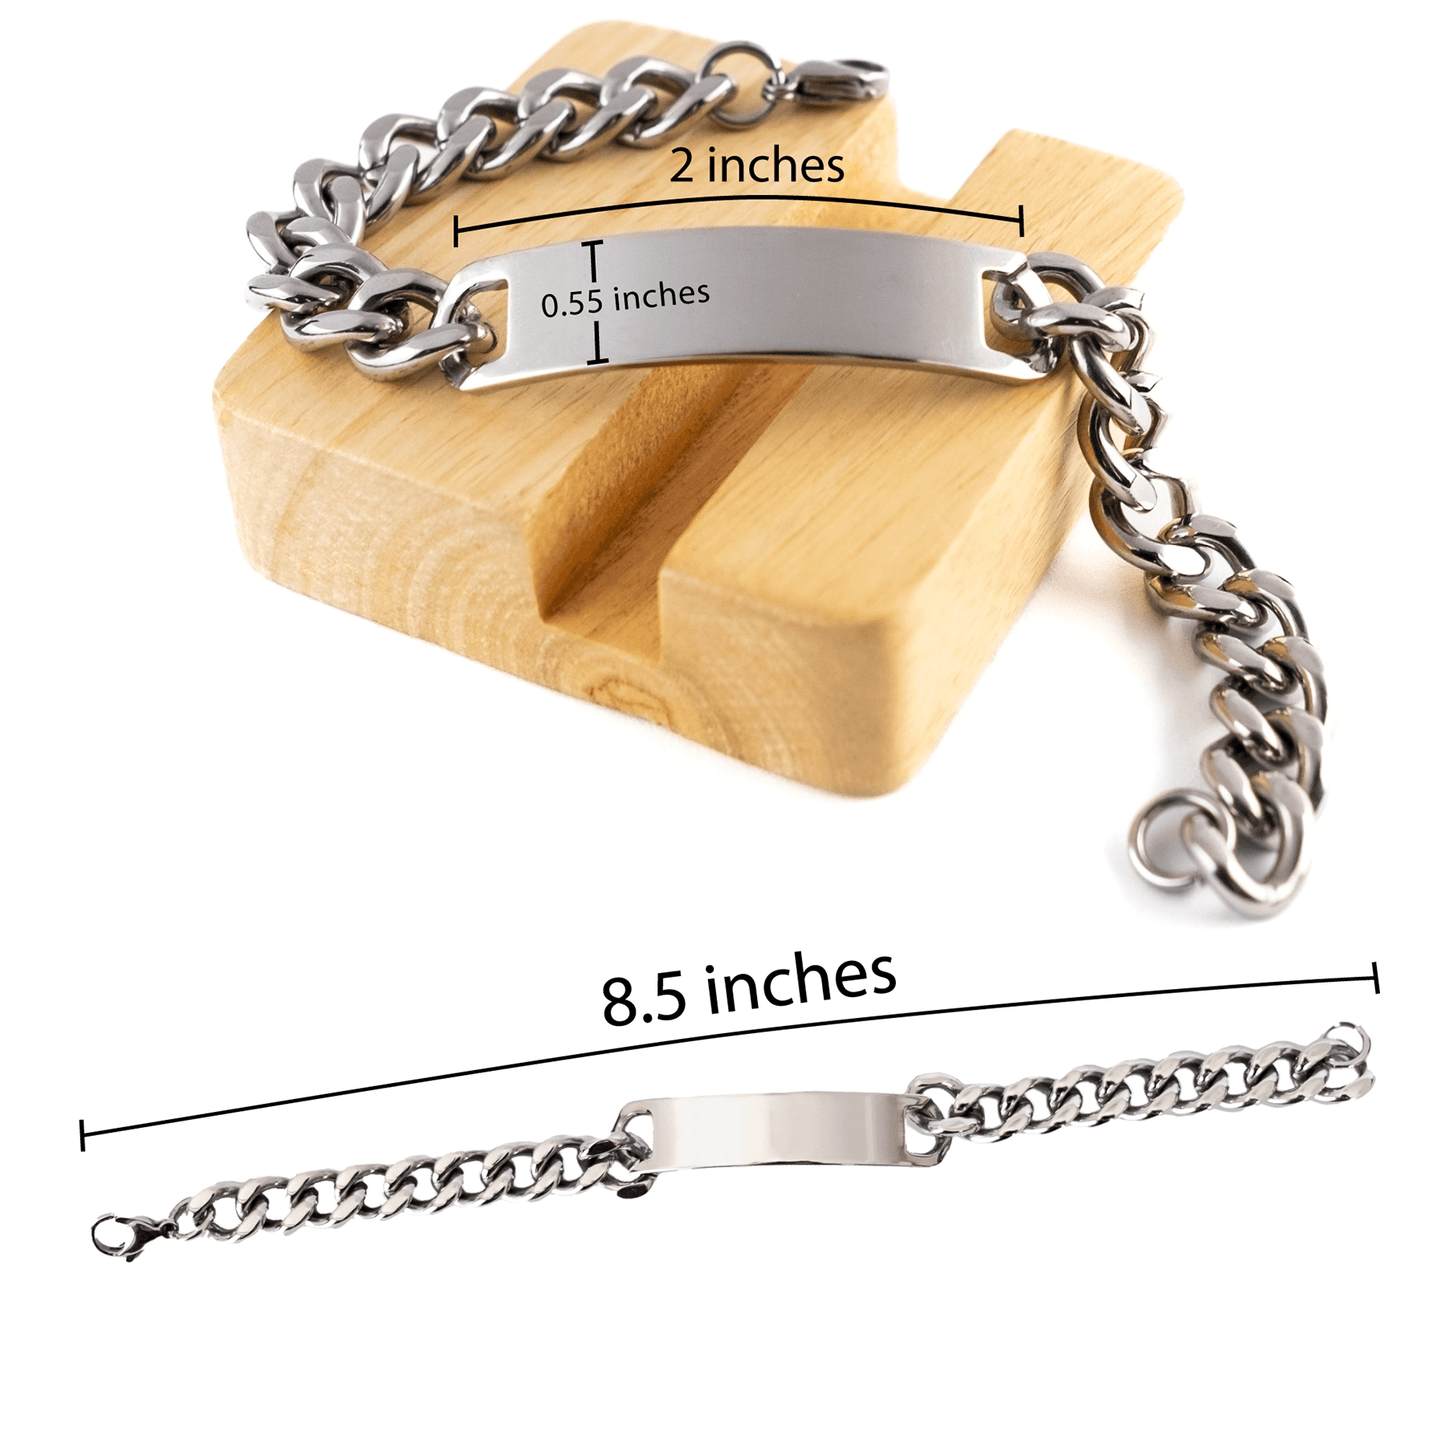 Remarkable Database Administrator Gifts, Your dedication and hard work, Inspirational Birthday Christmas Unique Cuban Chain Stainless Steel Bracelet For Database Administrator, Coworkers, Men, Women, Friends - Mallard Moon Gift Shop